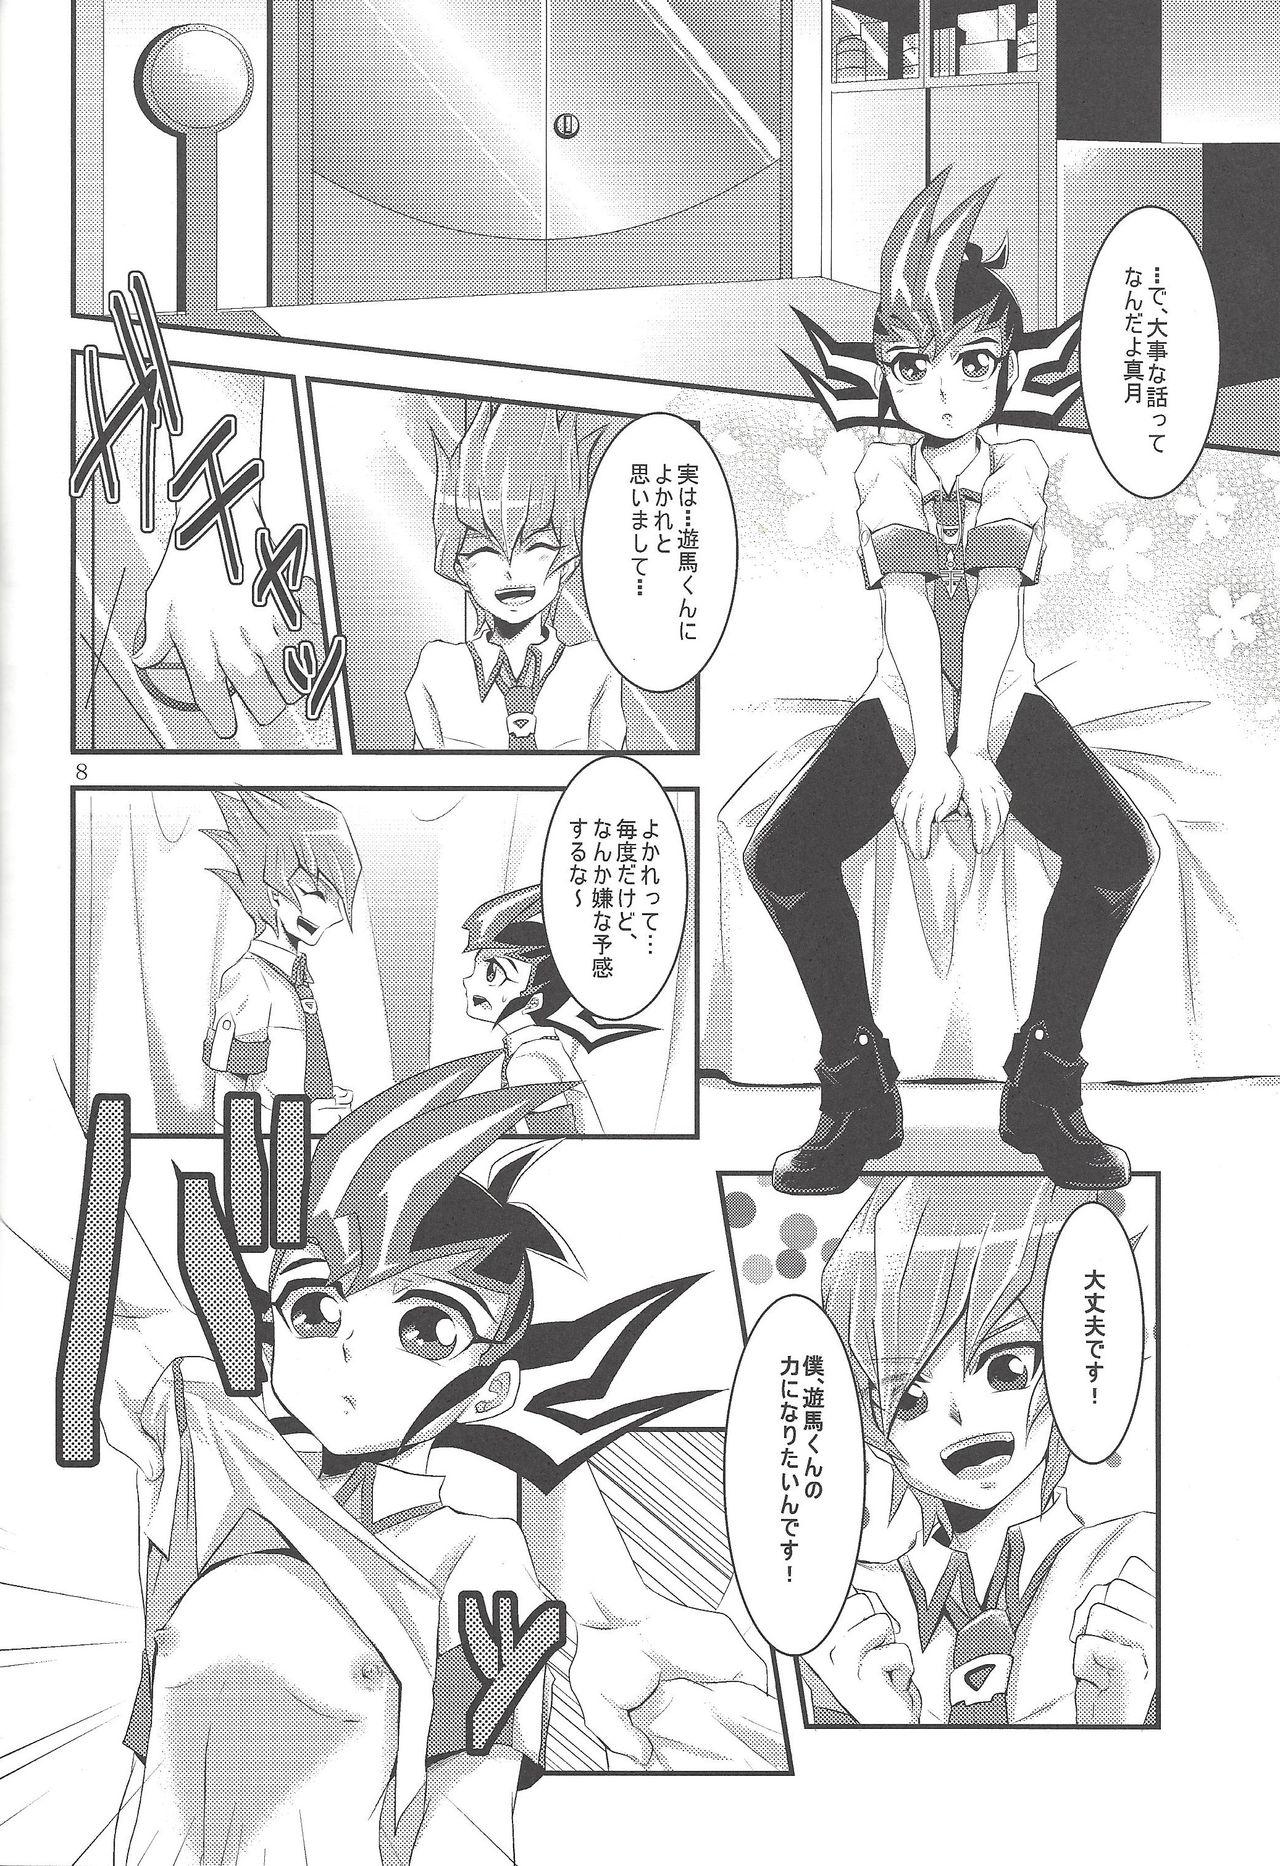 Wet Pussy Yokare to Omotte - Yu-gi-oh zexal Gay Broken - Page 7